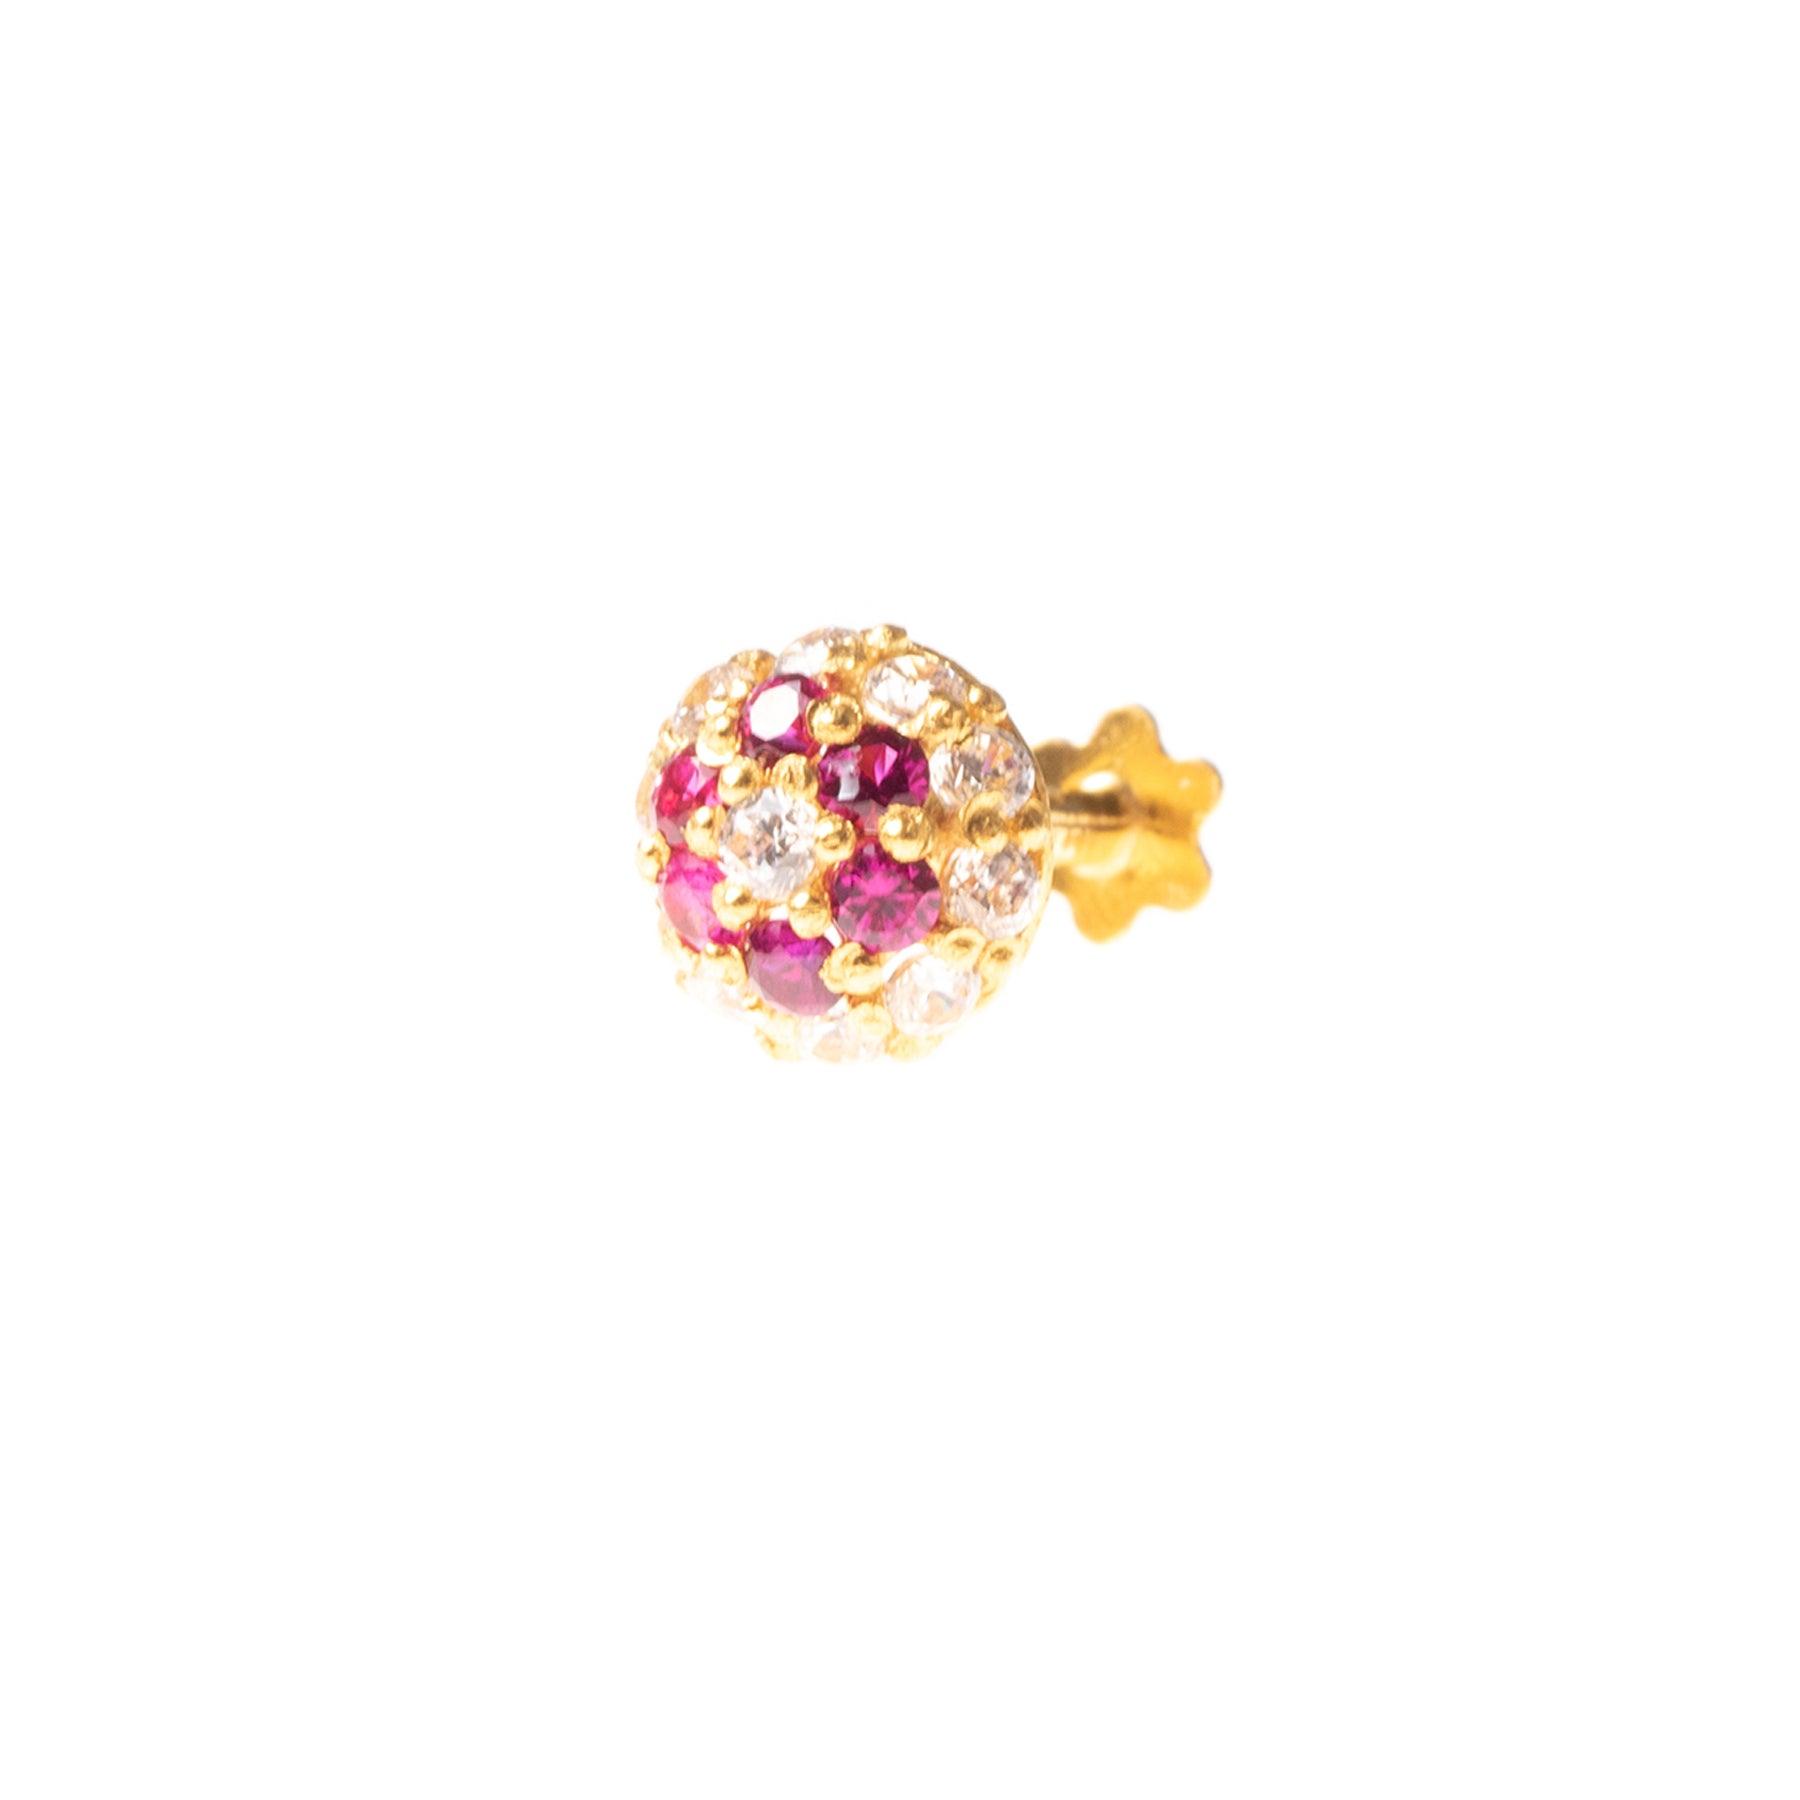 18ct Yellow Gold Nose Stud set with white and colour Cubic Zirconia Stones NIP-8-470